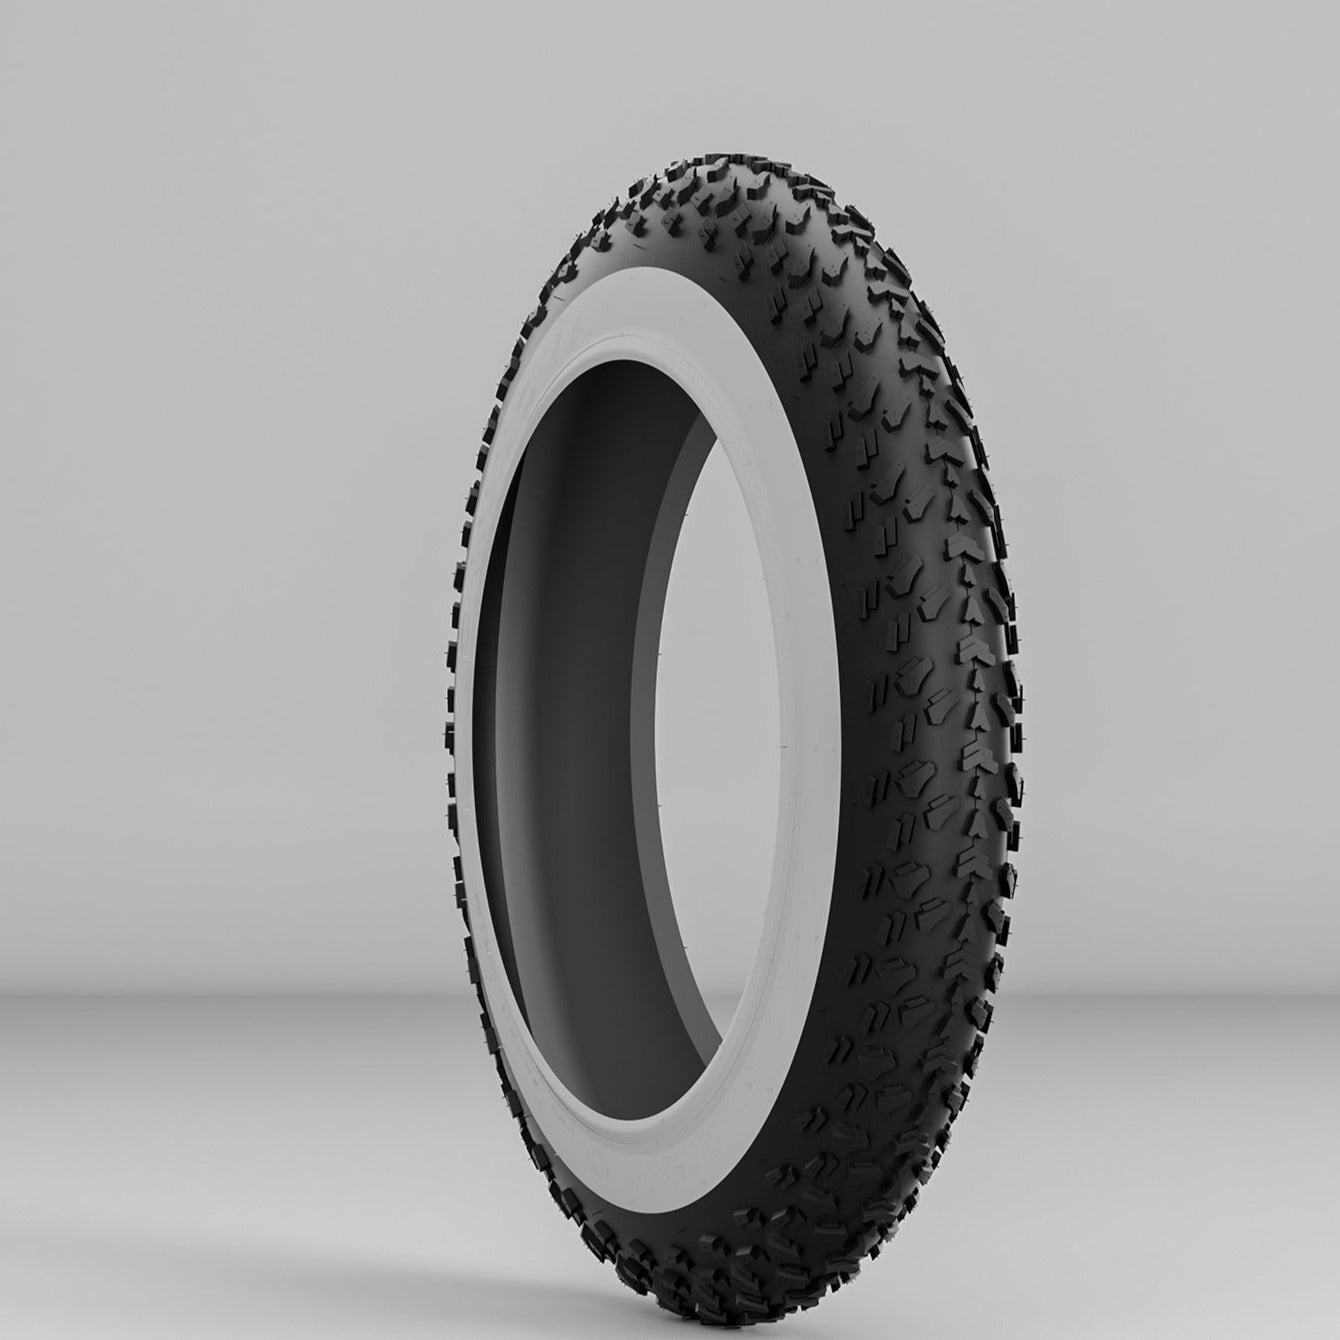 20 x 4.0" White Wall Off Road Fat Tire